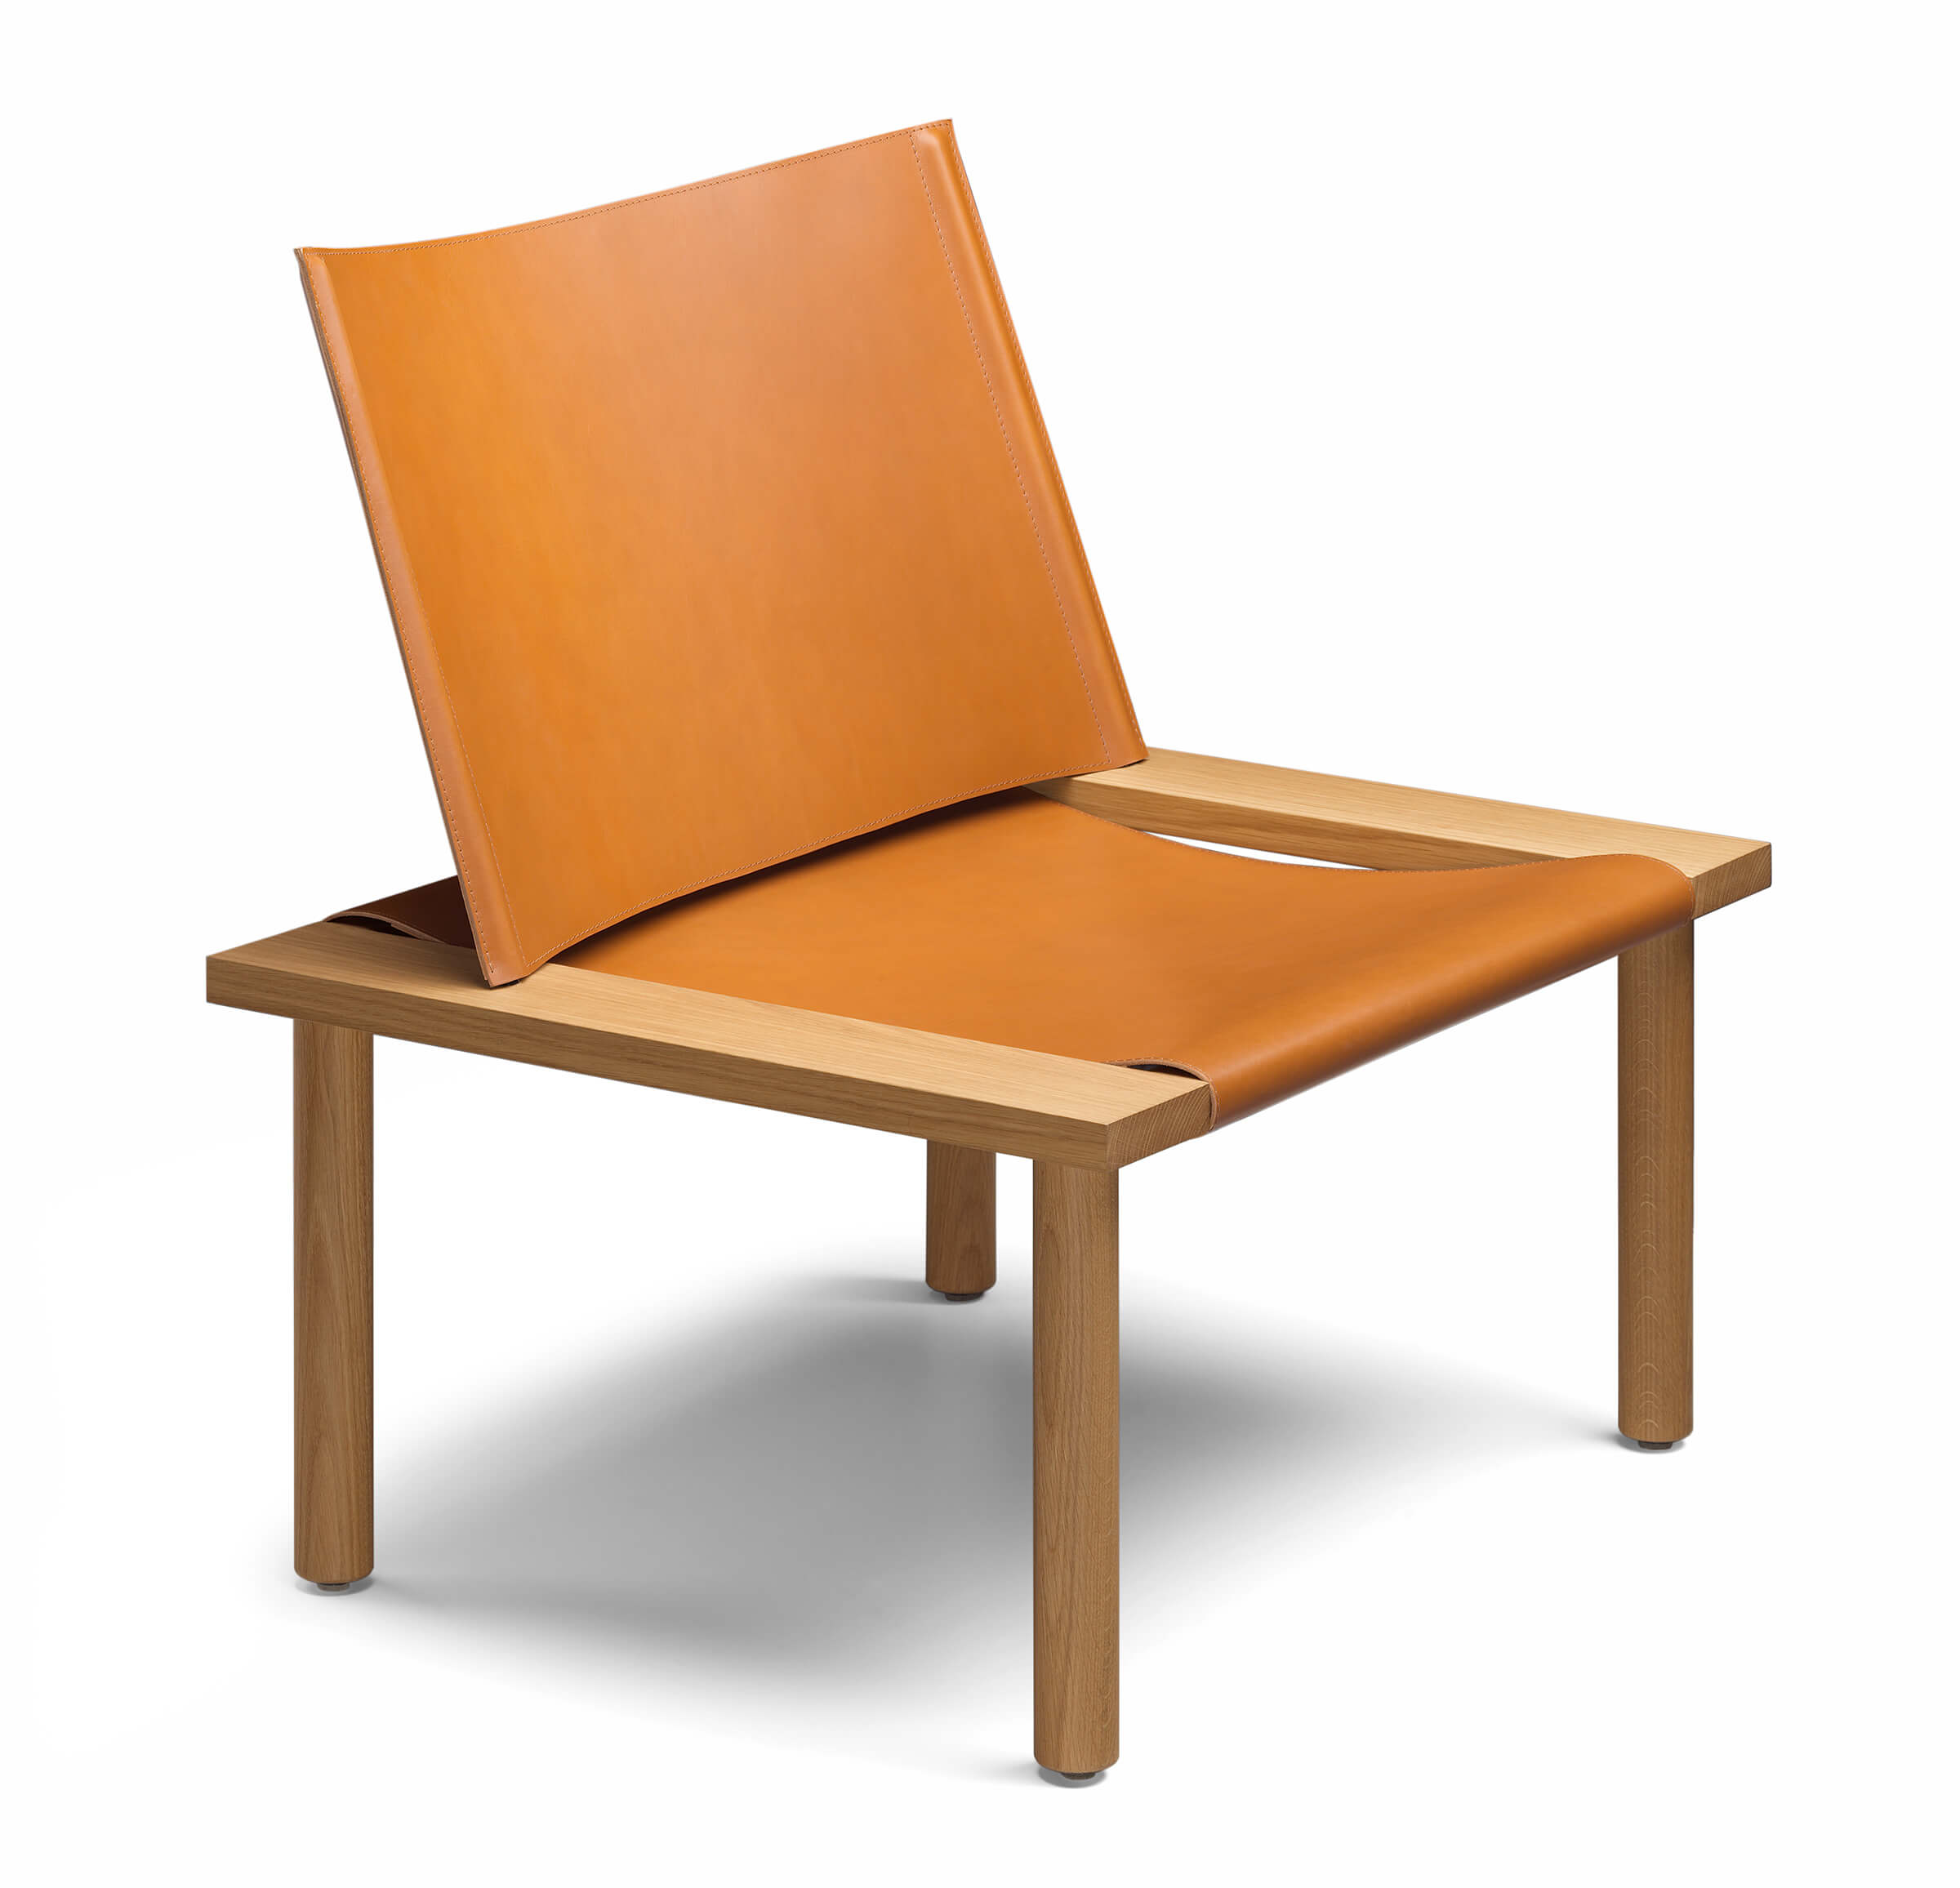 ILMA Lounge Chair by Jonas Lutz for e15